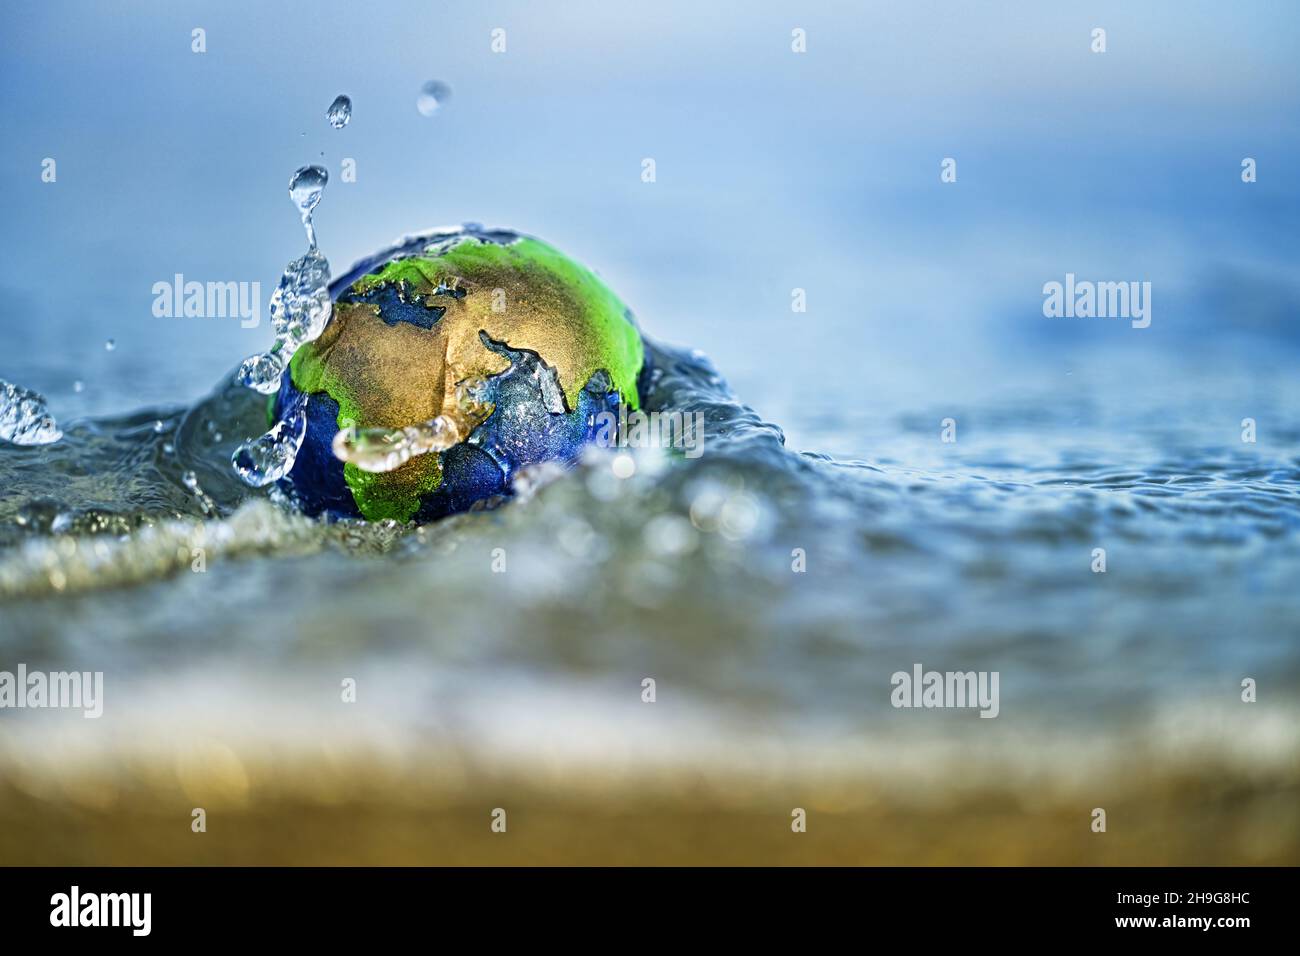 Globe in the water, climate change Stock Photo